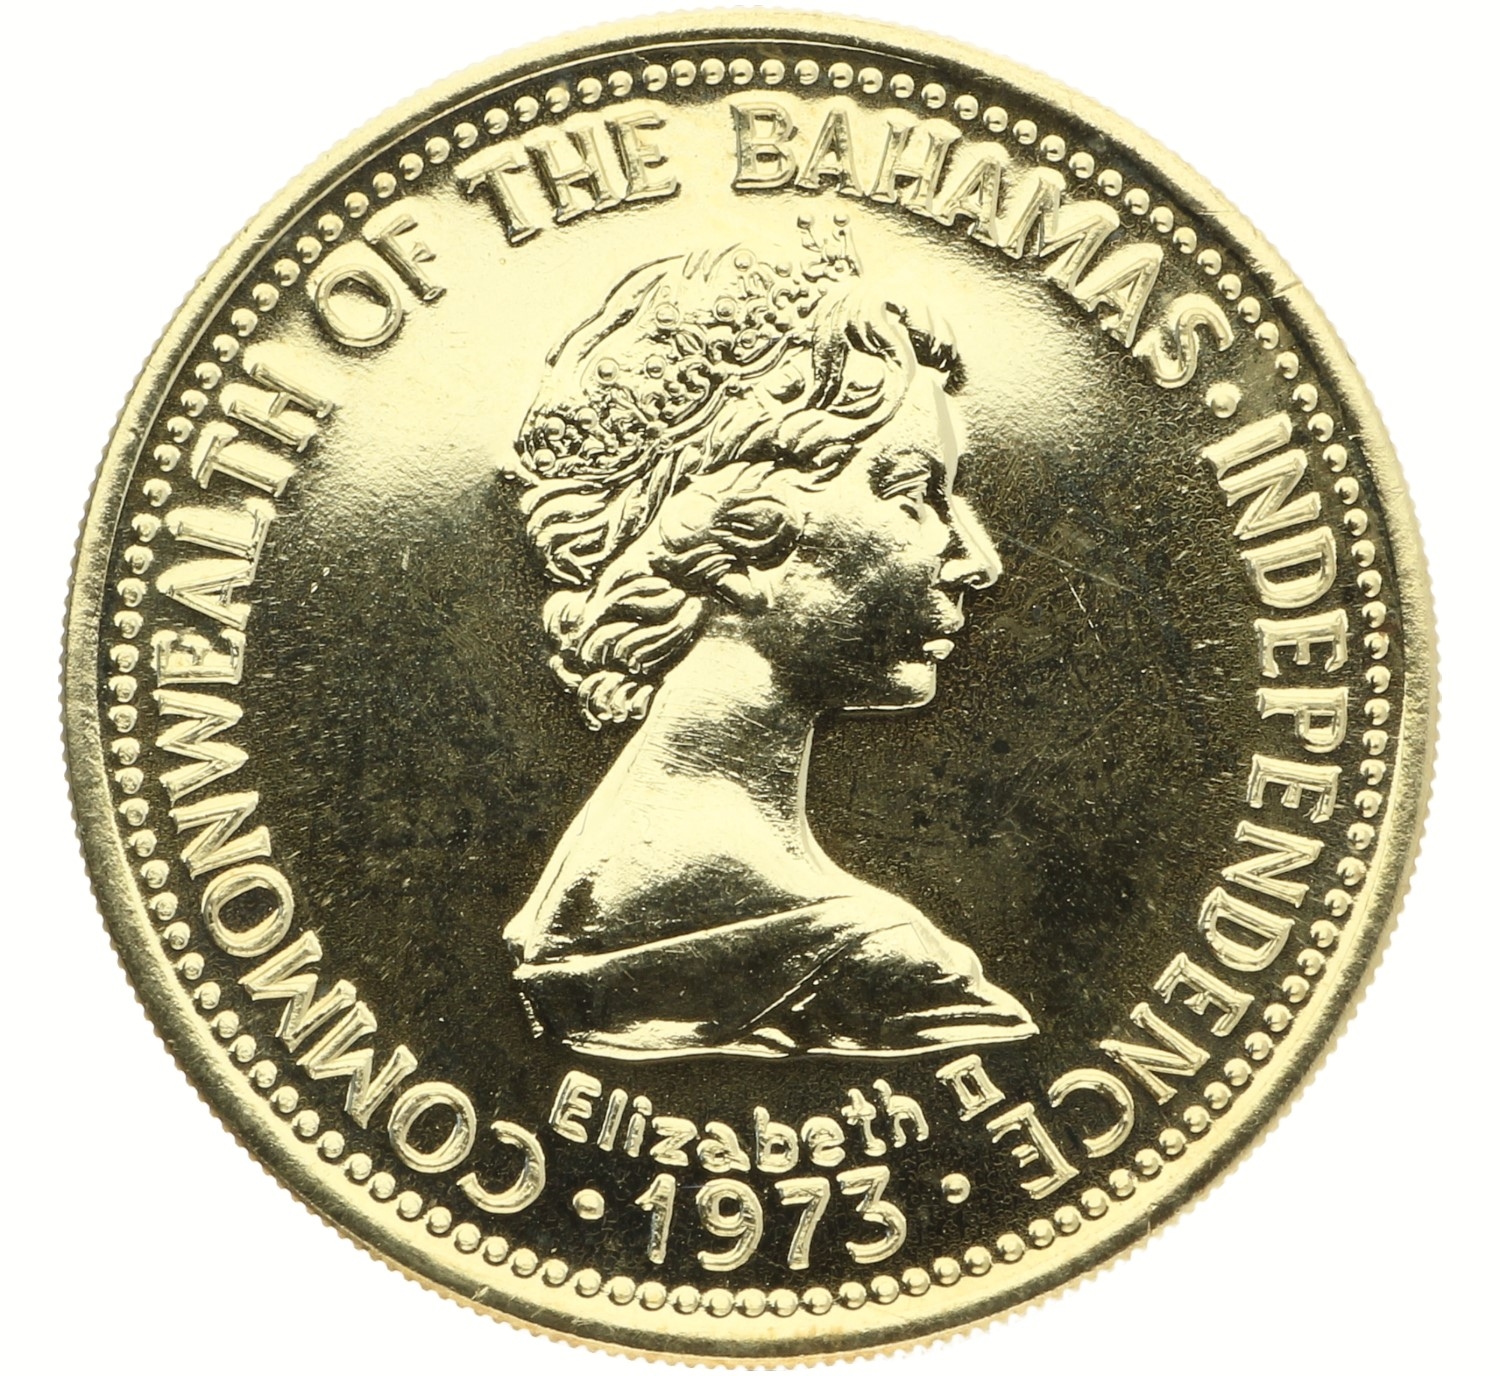 100 Dollars - Commonwealth of the Bahamas - Gold - 1973